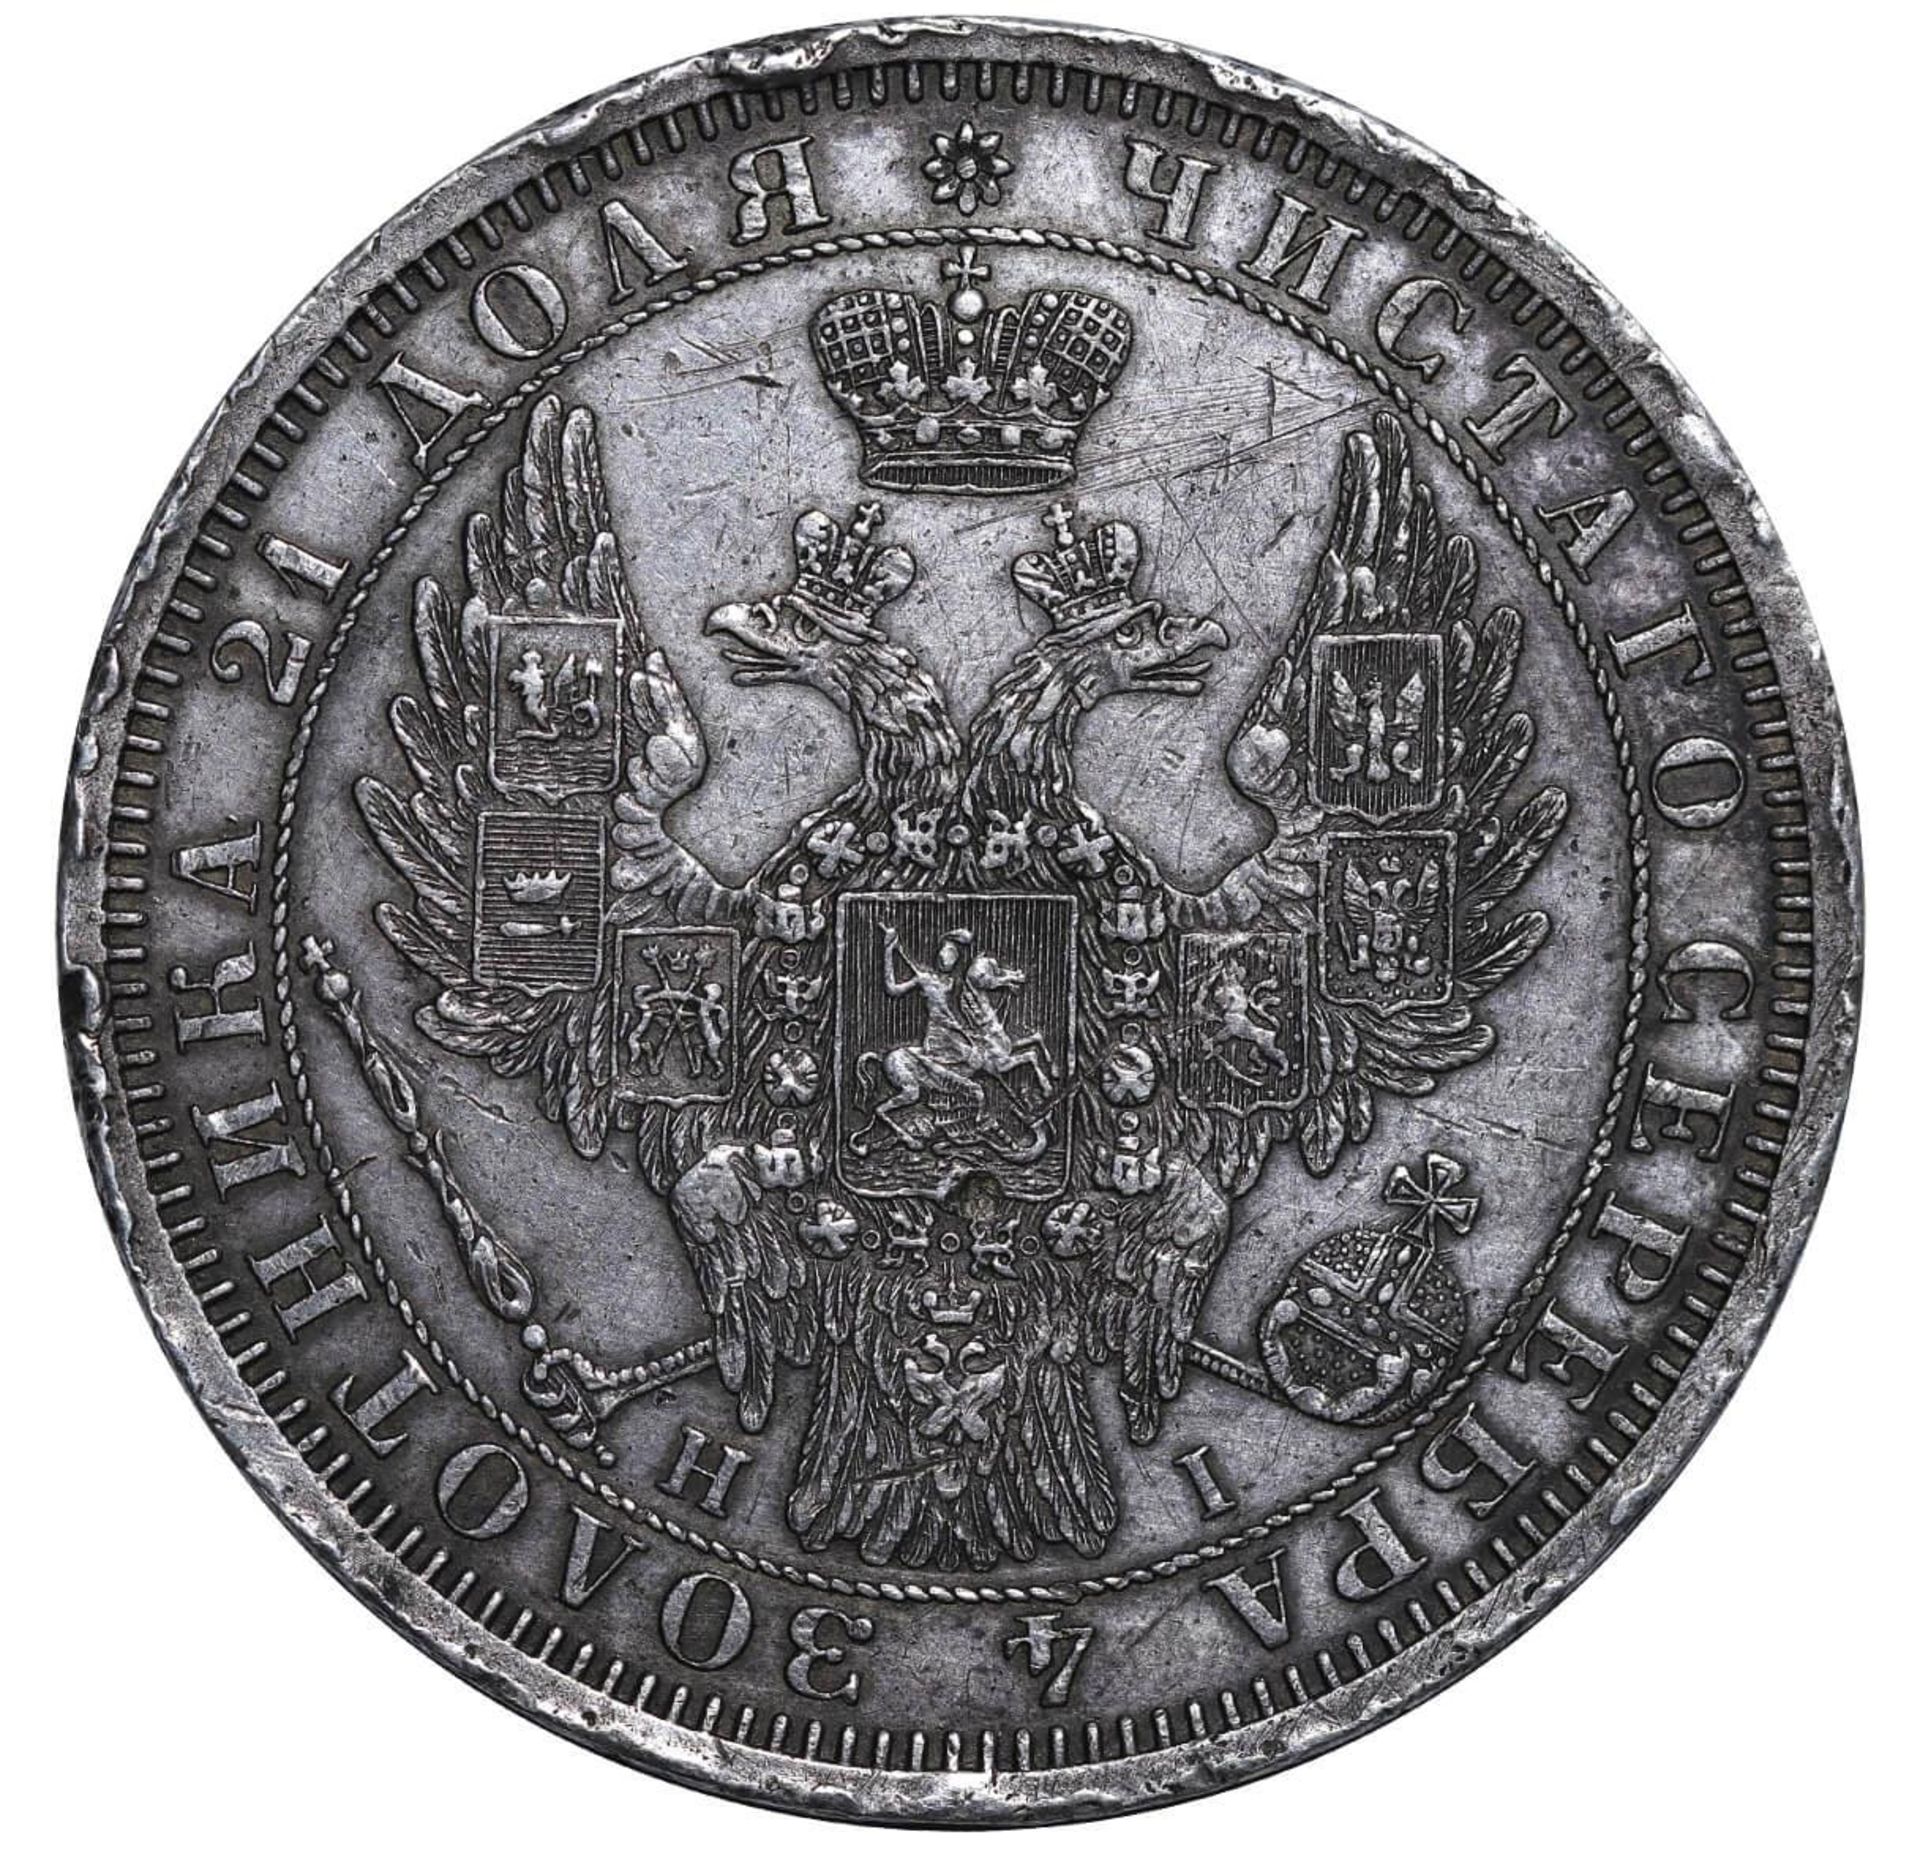 Russian Empire, 1 Rouble, 1854 year, SPB-NI - Image 3 of 3